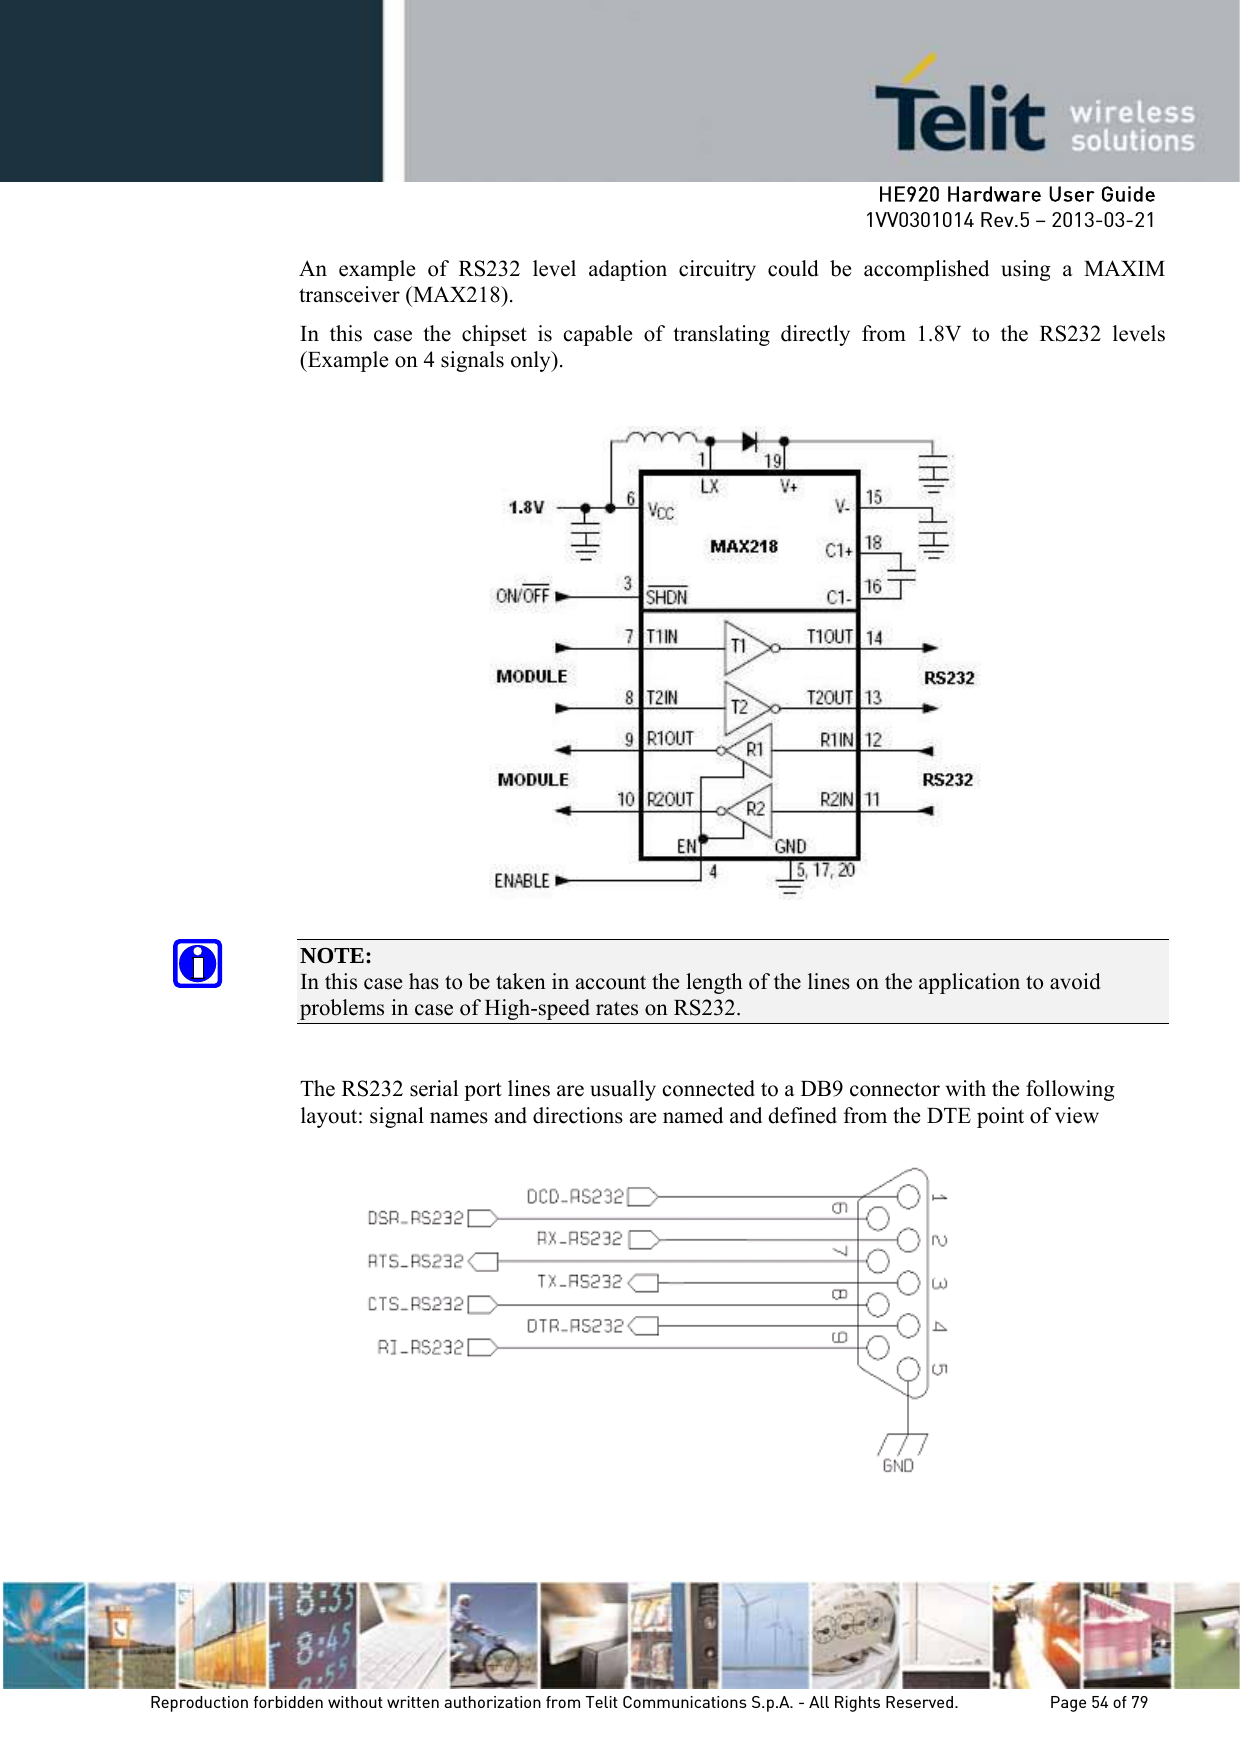     HE920 Hardware User Guide 1VV0301014 Rev.5 – 2013-03-21 Reproduction forbidden without written authorization from Telit Communications S.p.A. - All Rights Reserved.    Page 54 of 79  An example of RS232 level adaption circuitry could be accomplished using a MAXIM transceiver (MAX218).  In this case the chipset is capable of translating directly from 1.8V to the RS232 levels (Example on 4 signals only).    NOTE:  In this case has to be taken in account the length of the lines on the application to avoid problems in case of High-speed rates on RS232.  The RS232 serial port lines are usually connected to a DB9 connector with the following layout: signal names and directions are named and defined from the DTE point of view  